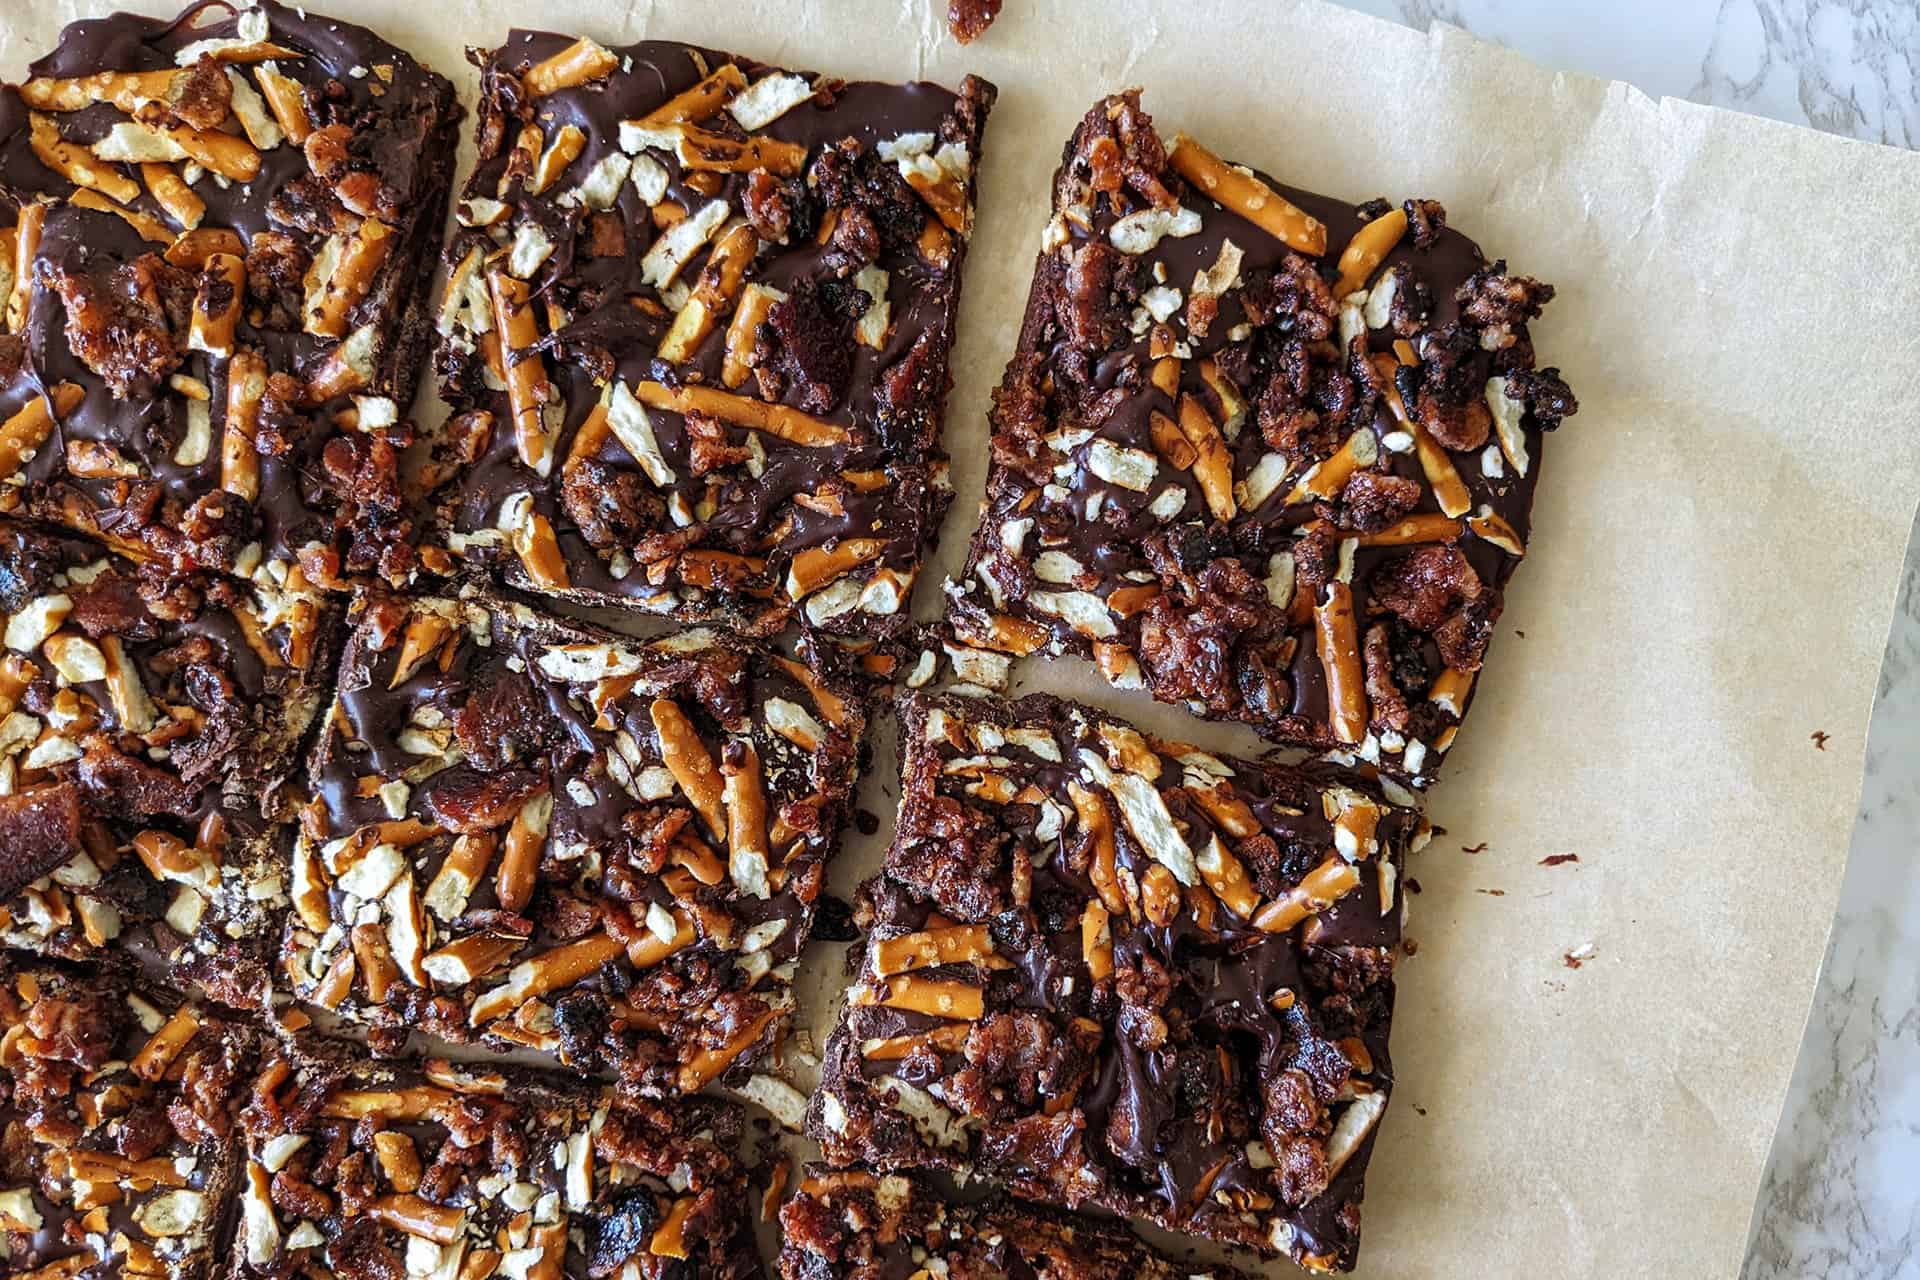 Chocolate bark with candied bacon and pretzel pieces